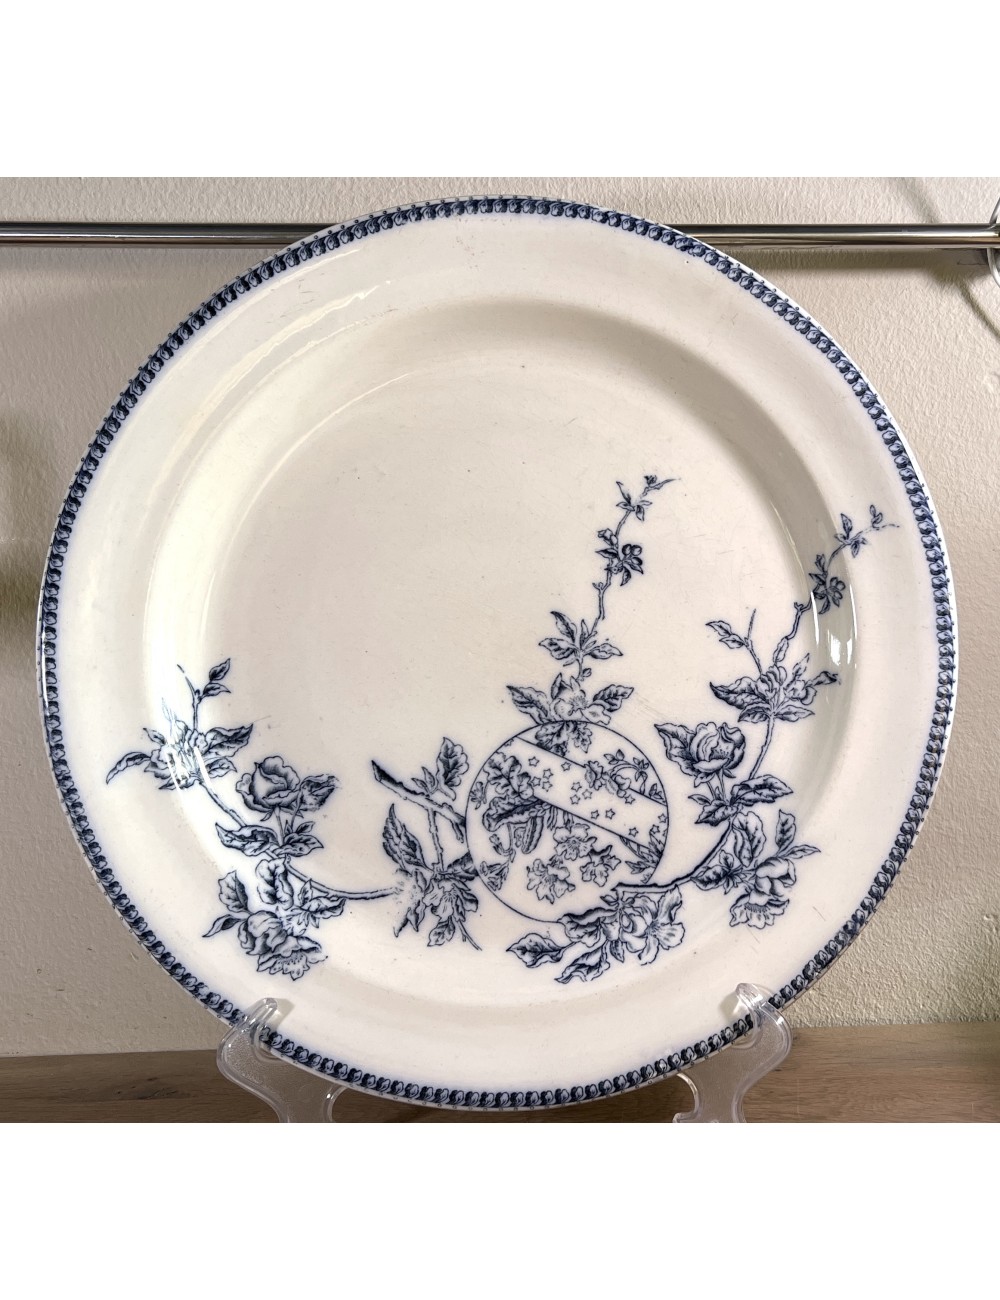 Plate - flat round model - Faiencerie de Jemappes - décor of roses/wild roses in flowing blue